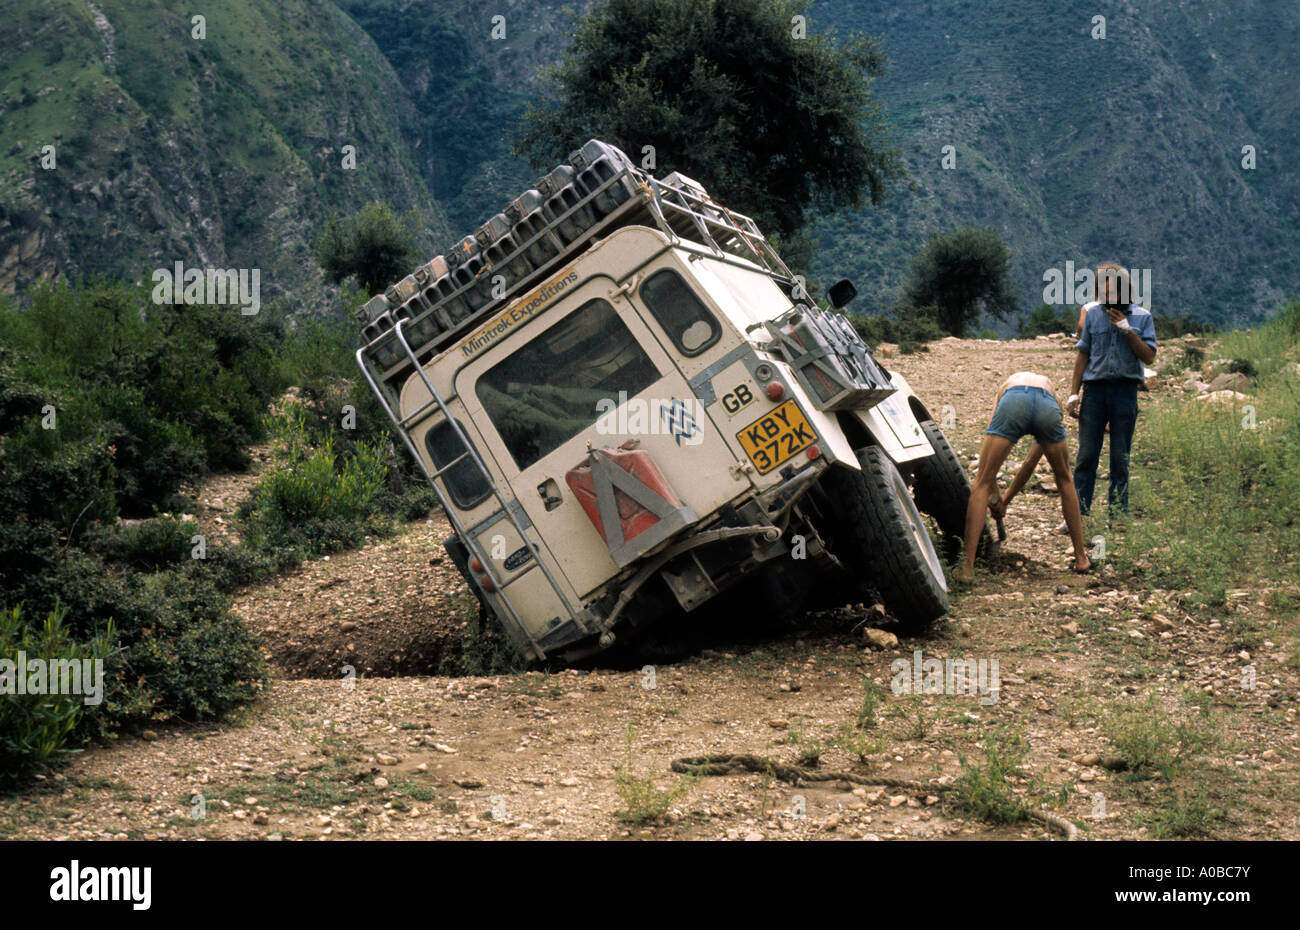 0533 02 Land Rover Series IIA one ton model in ditch Swat Valley Northwest Pakistan Asia Indian Subcontinent Stock Photo